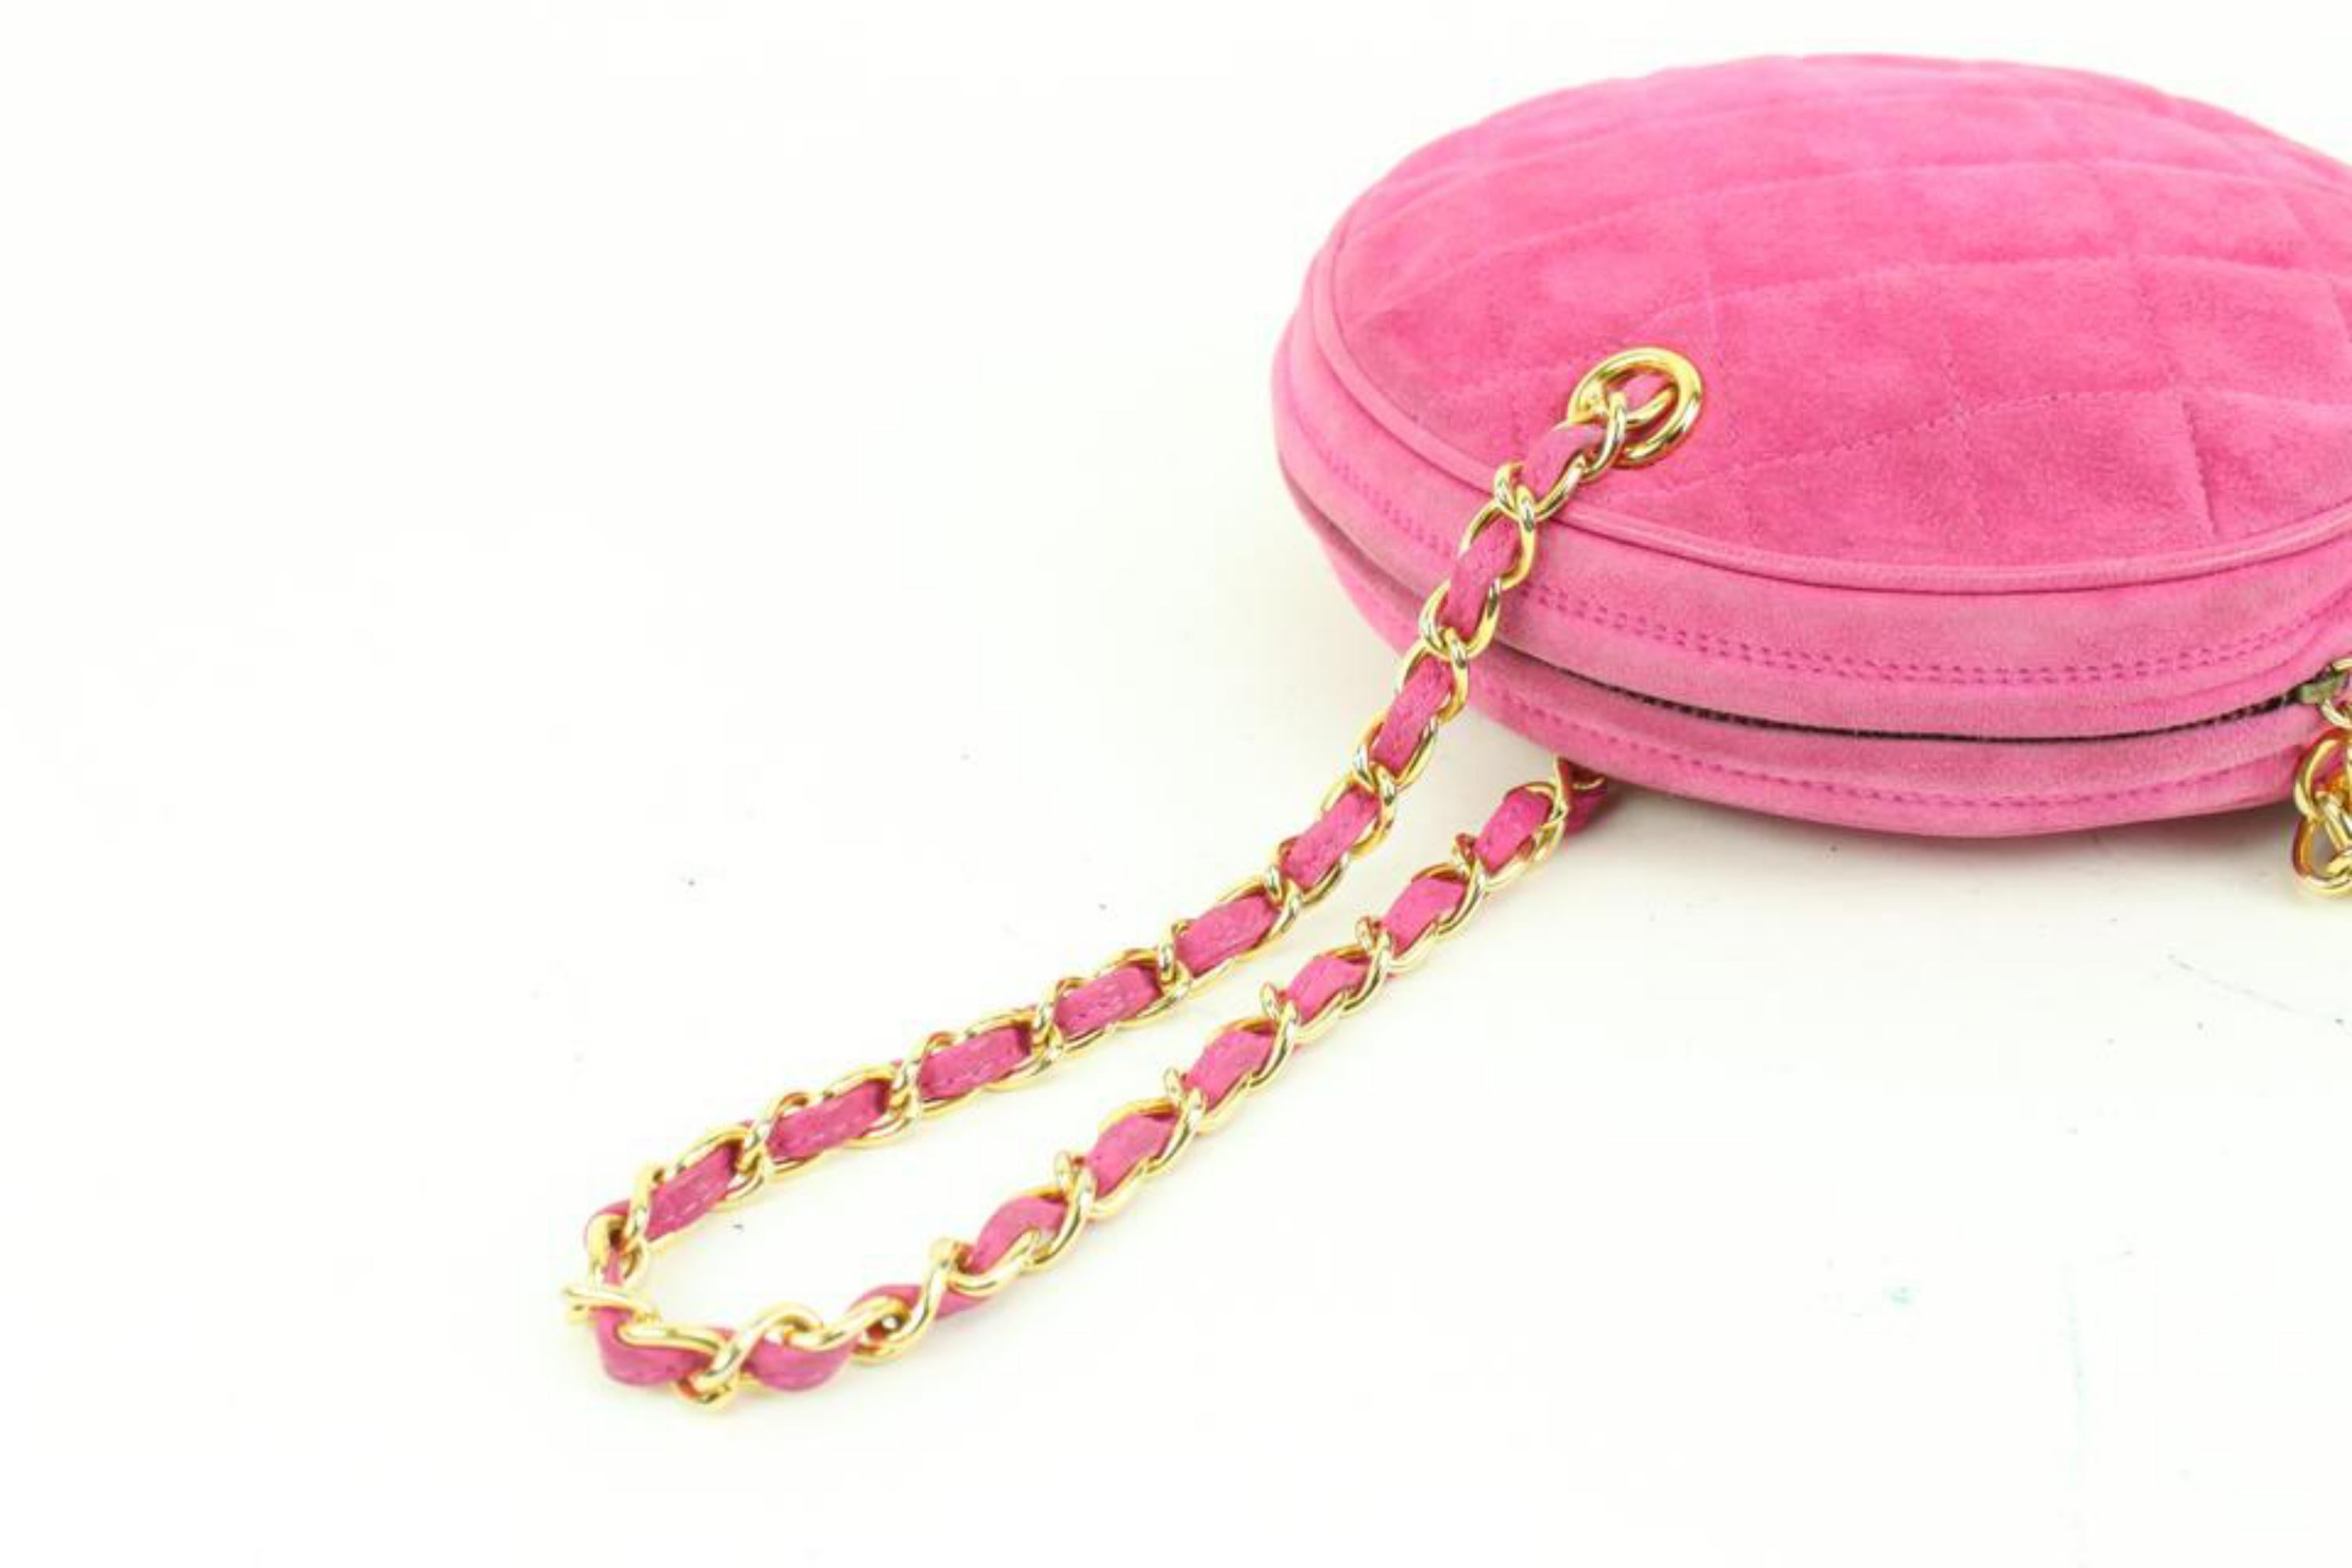 Chanel Hot Pink Quilted Suede Fringe Tassel Round Clutch on Chain88cz425s In Good Condition For Sale In Dix hills, NY